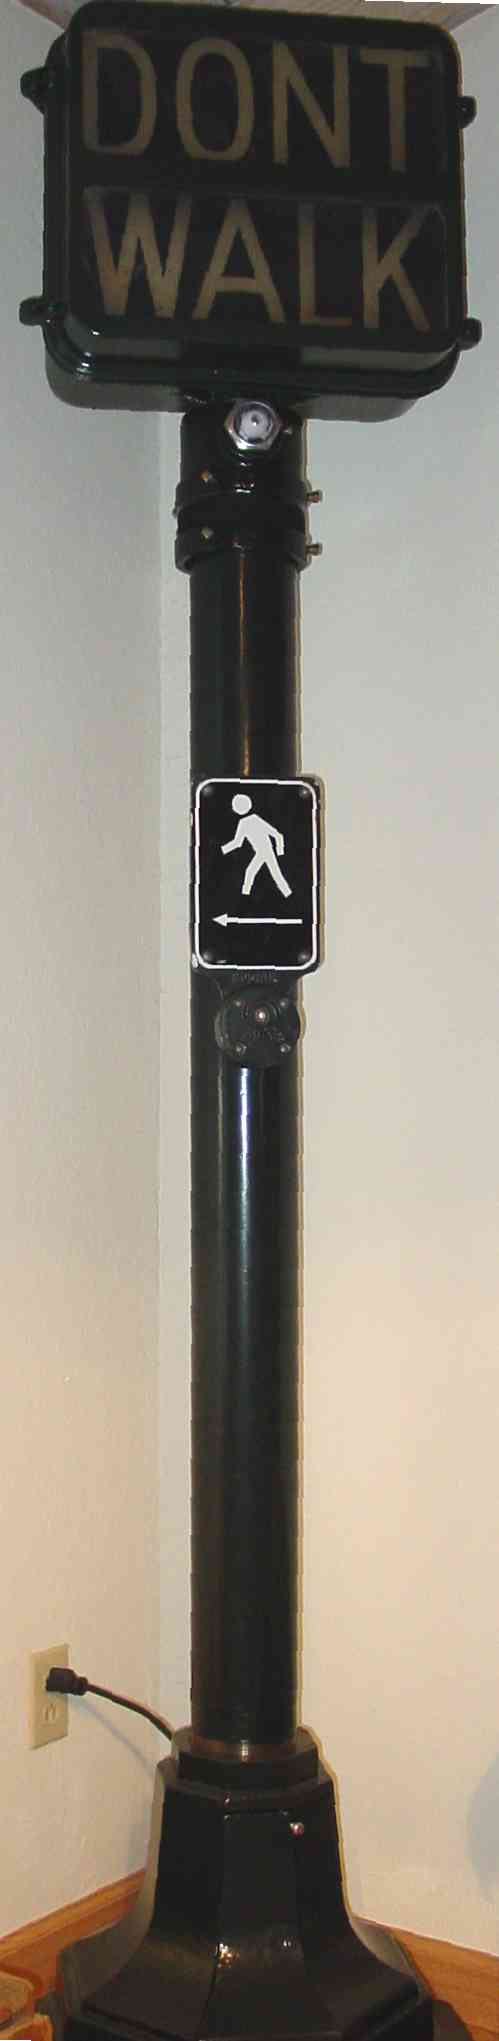 Click picture for Walk signal